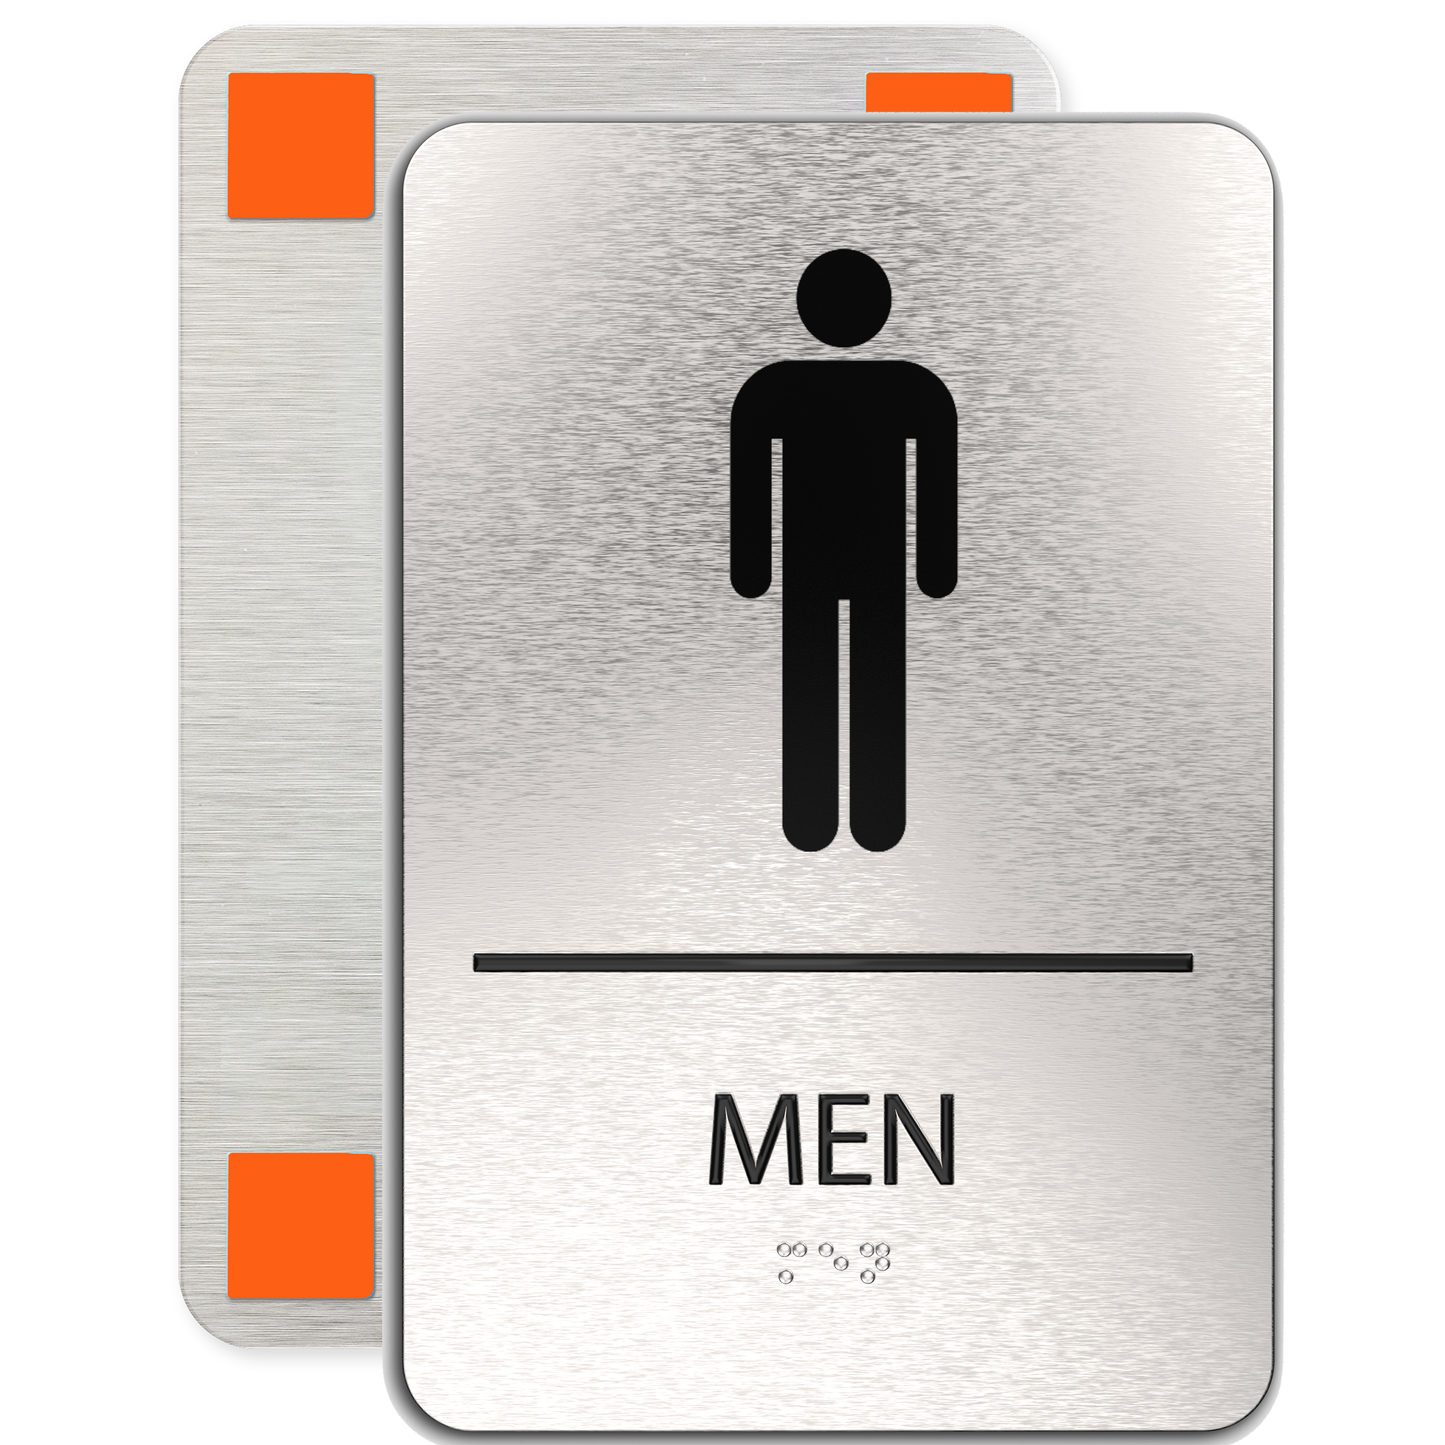 MEN Restroom Sign with Man Symbol, Non Accessible, Brushed Silver, Black Raised Text, Grade II Braille, 6"x9"